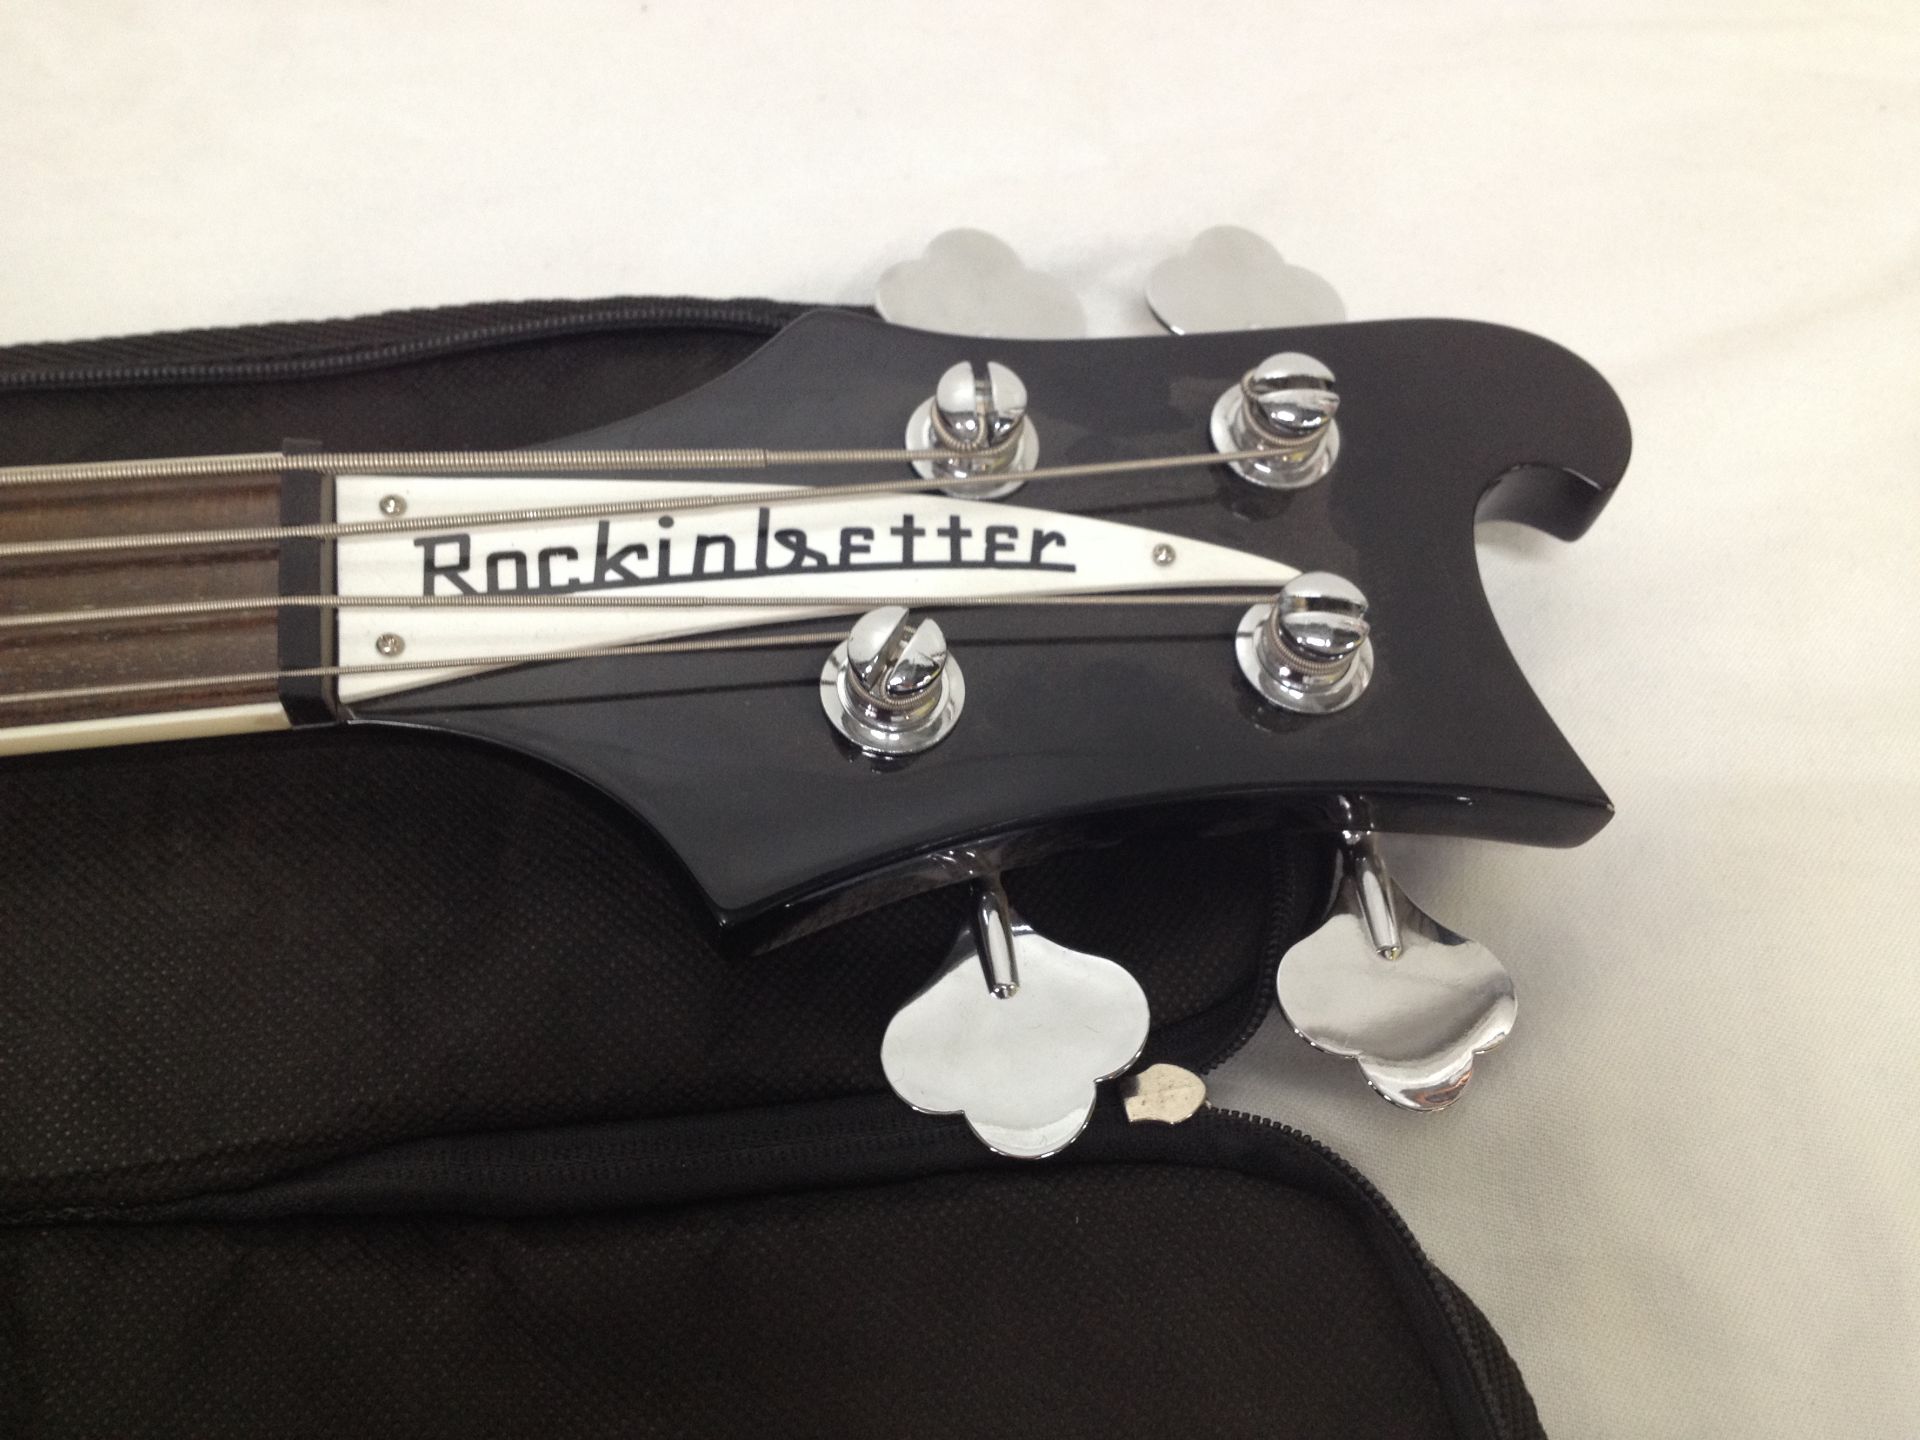 Rockinbetter Bass Guitar in Black and White with Multi-coloured Art Effect Case - Image 4 of 4